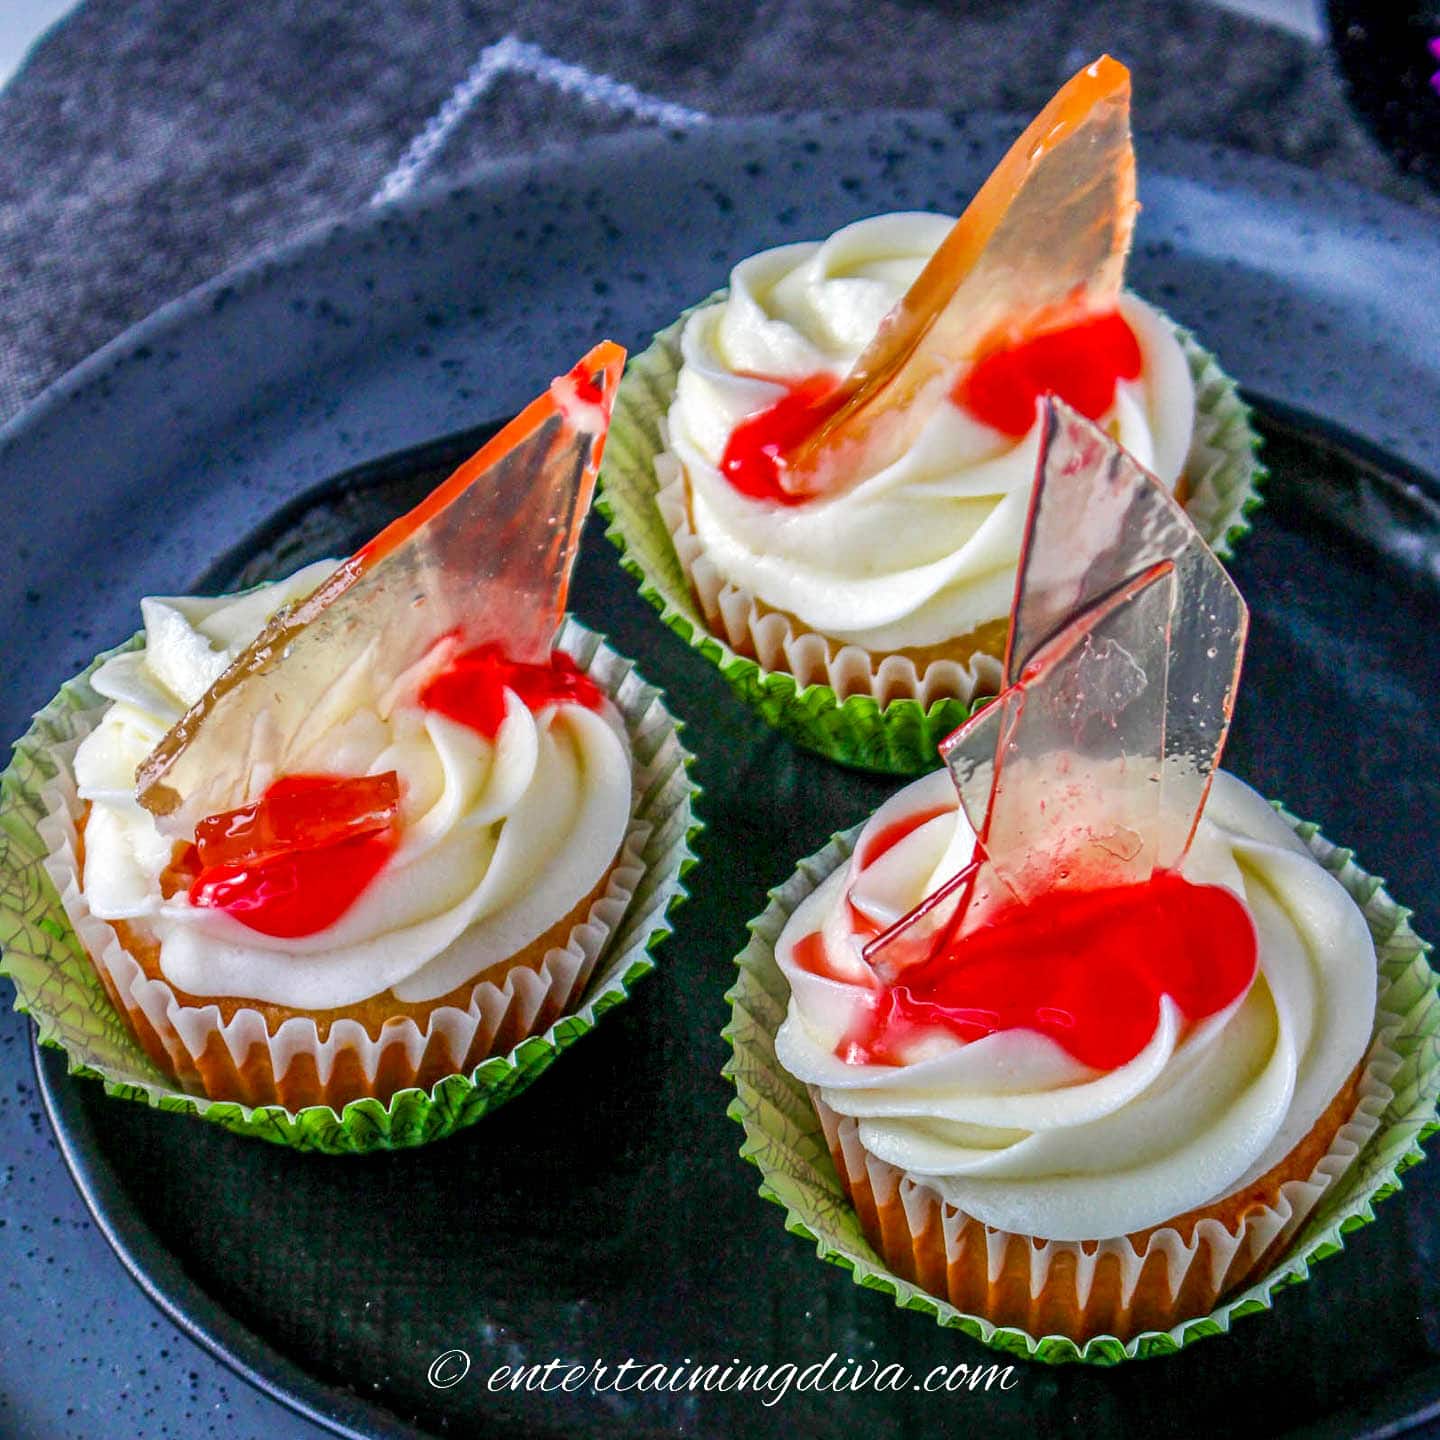 Broken glass Halloween cupcakes with strawberry blood